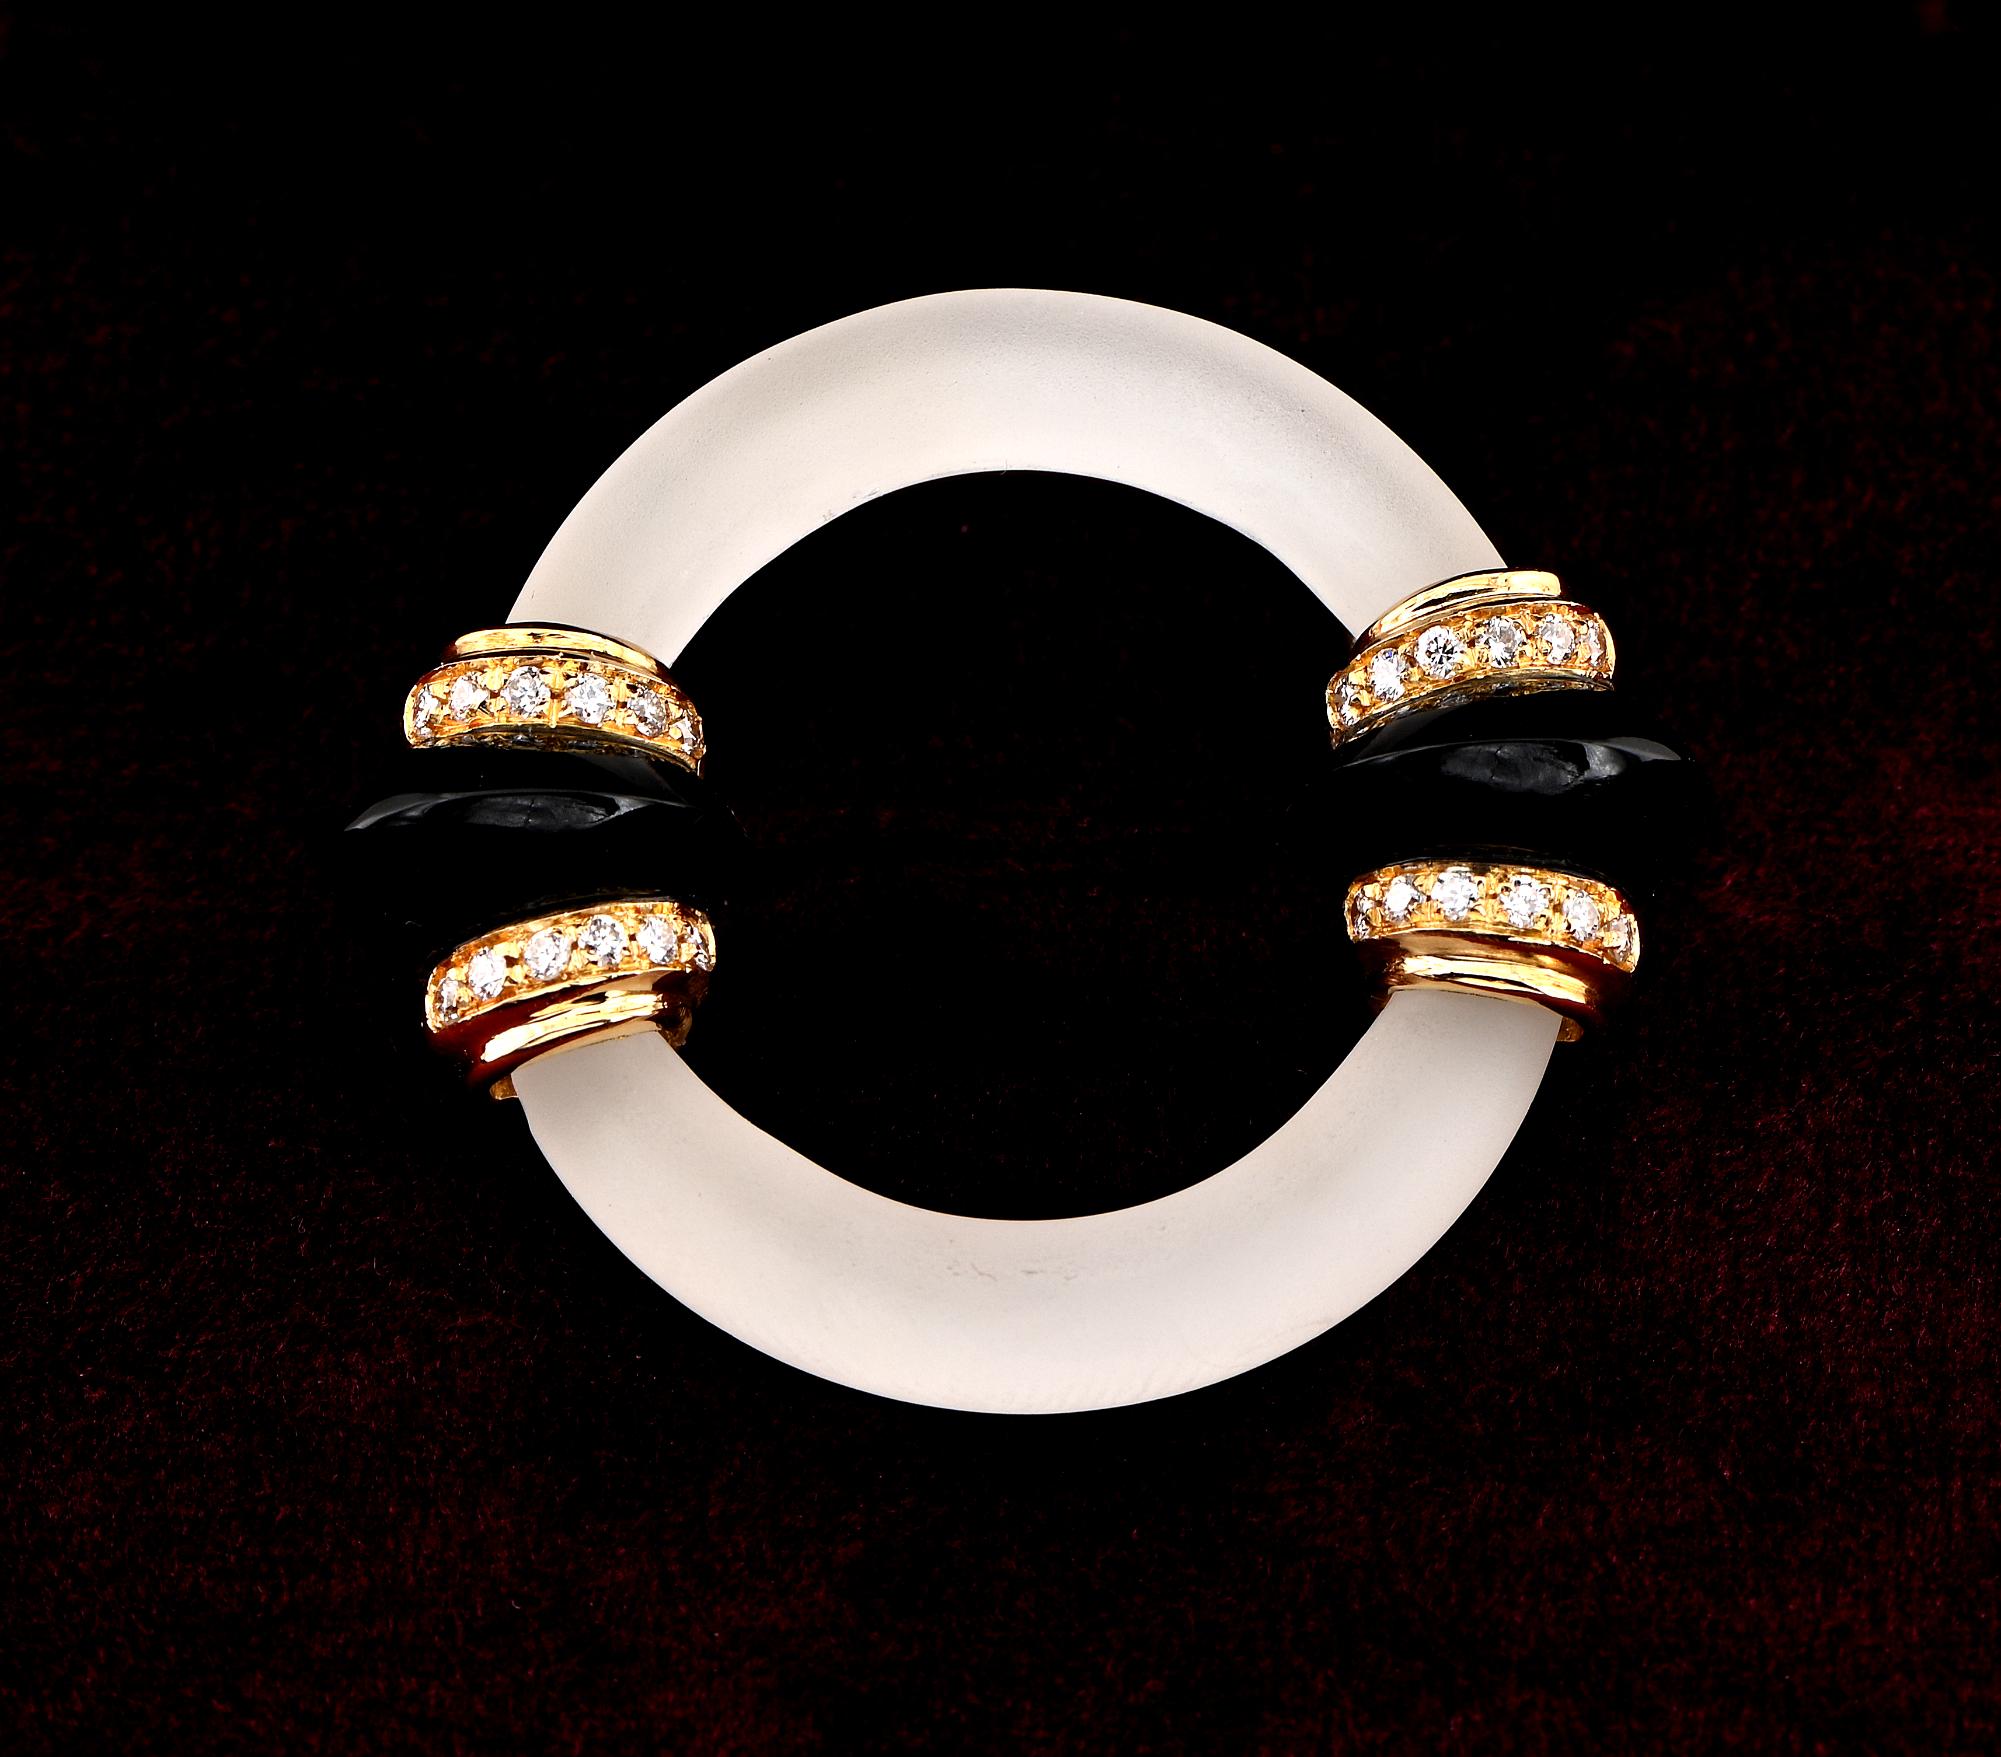 Dazzled By Pattern
This vintage brooch is 1945/50 ca – Italian origin
Stunning geometric circle shape supported by extra elements on sides, hand crafted of solid 18 KT gold, Italian hallmarks
Vintage Rock Crystal Black Onyx and Diamond brooches were